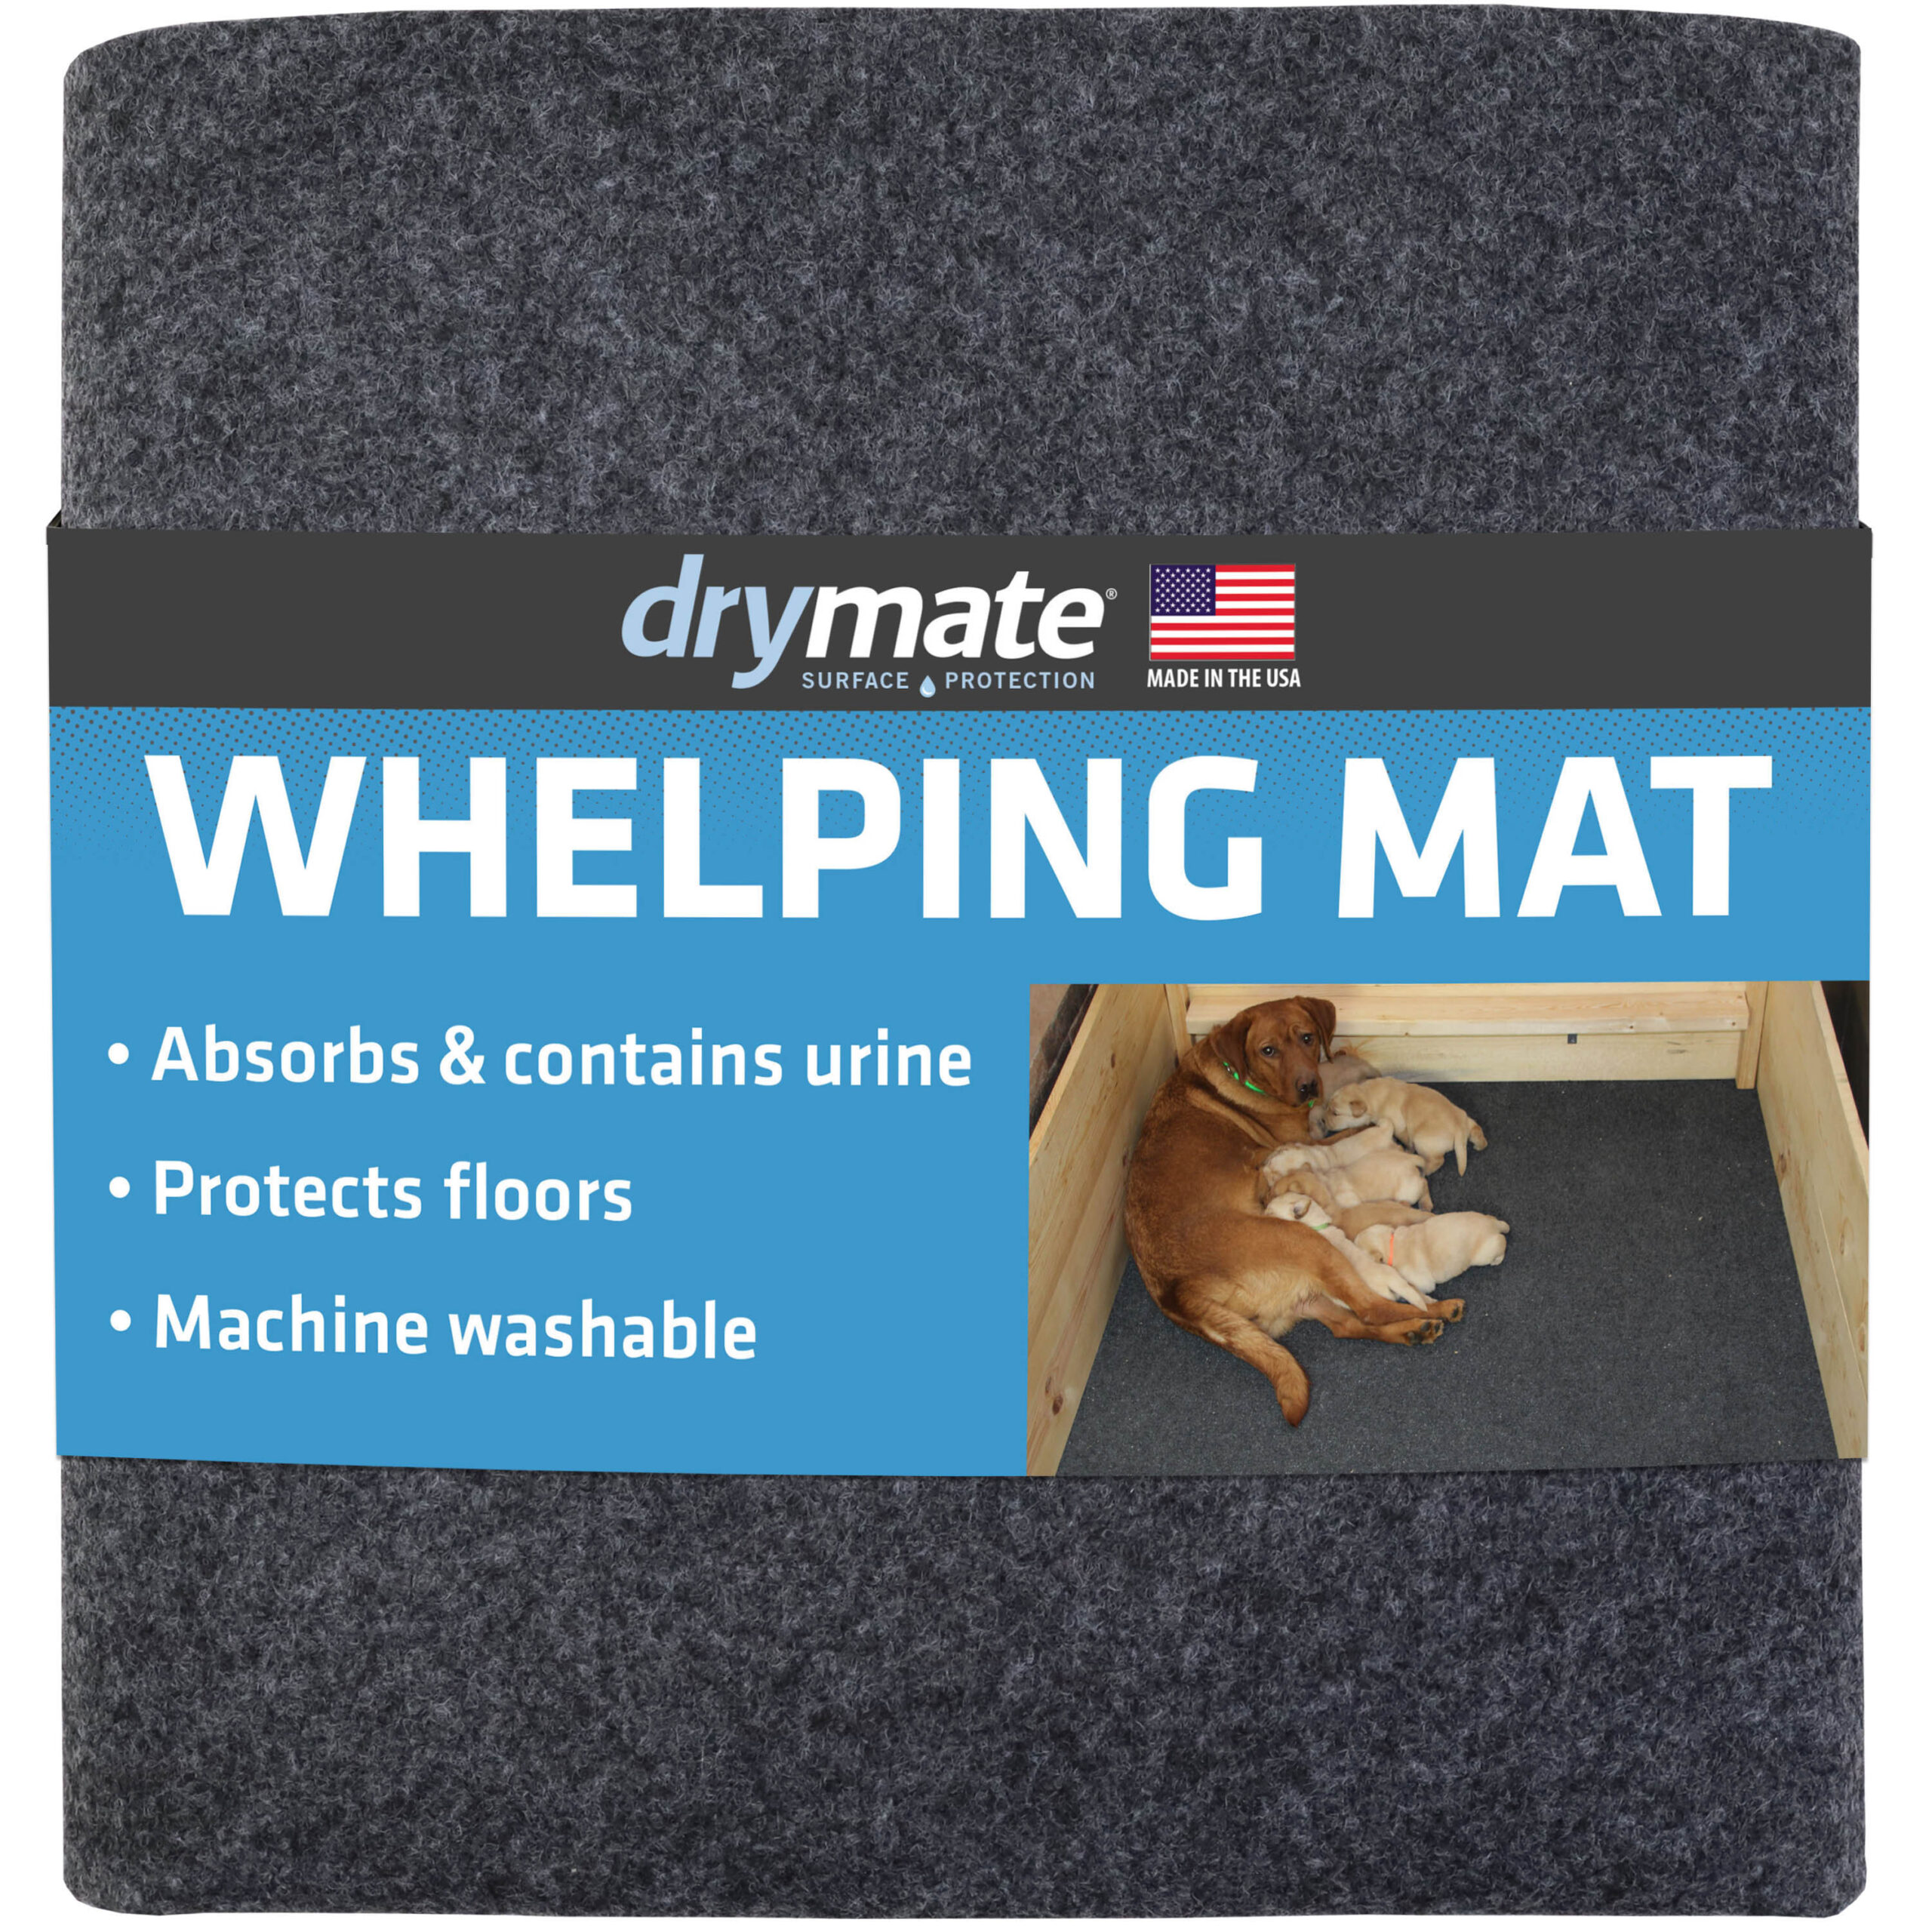 Drymate XL Litter Trapping Mat - RPM Drymate - Surface Protection Products  for Your Home